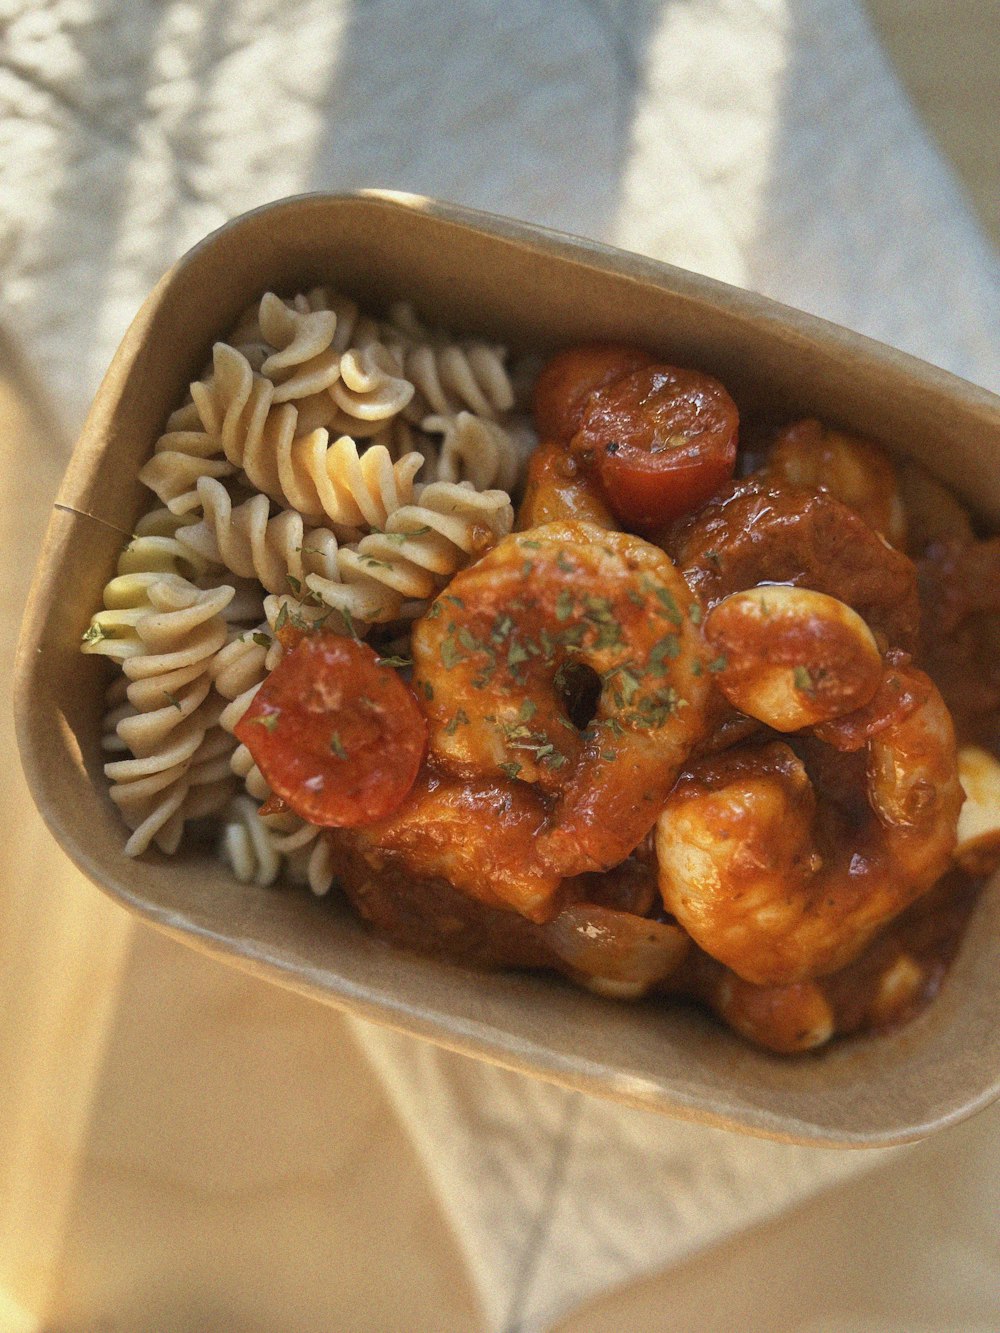 a close up of a bowl of food with pasta